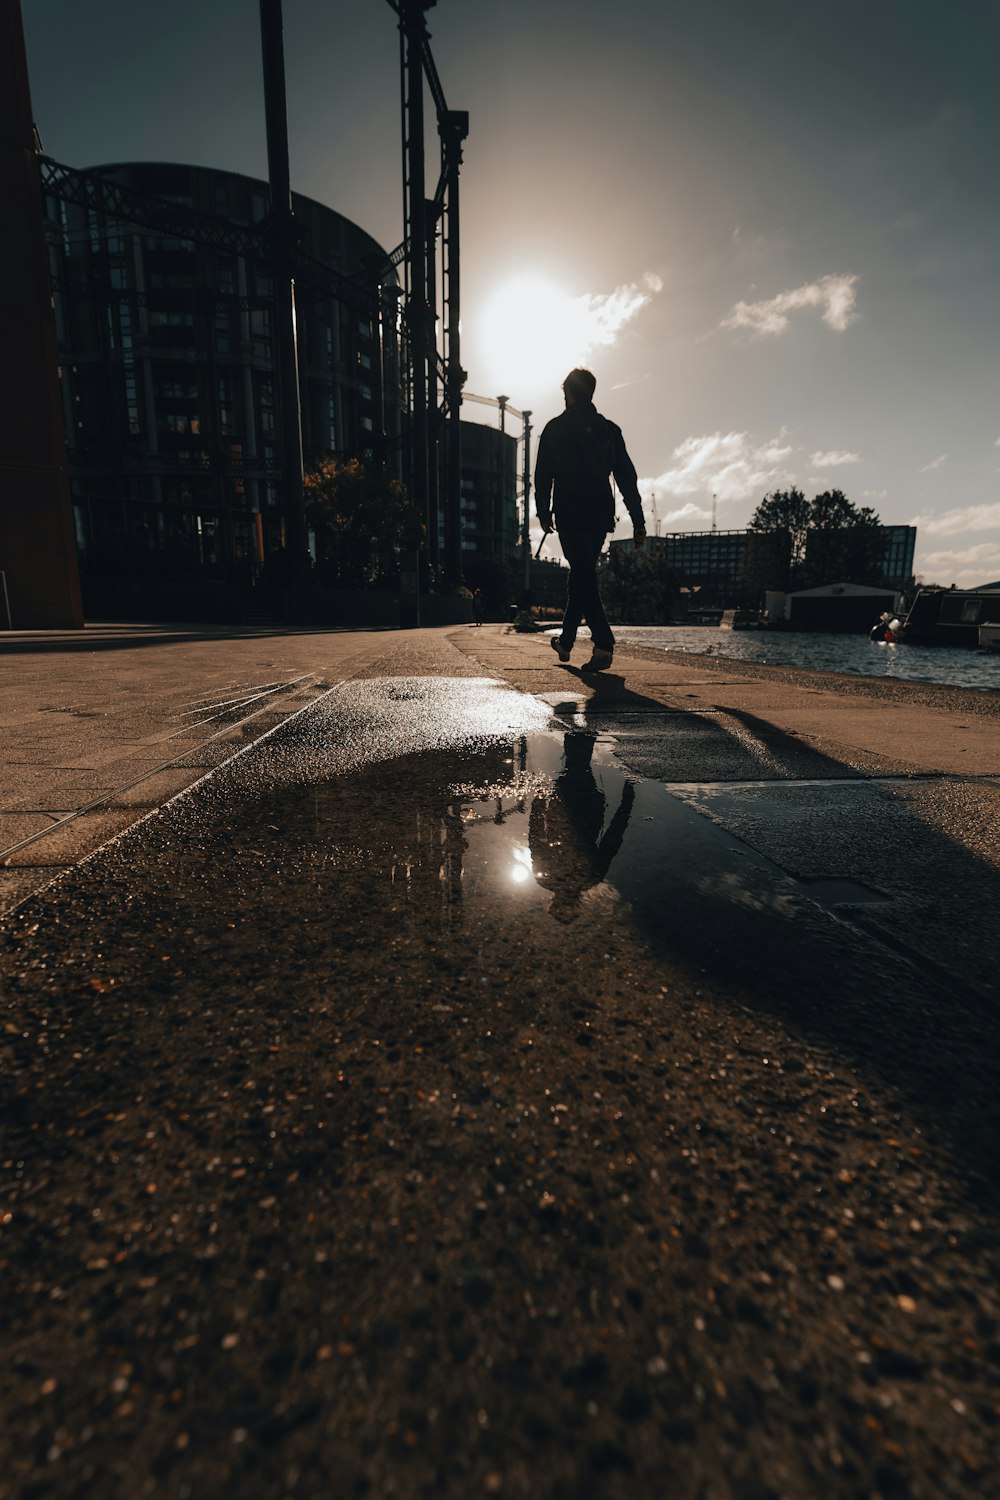 a man riding a skateboard across a puddle of water